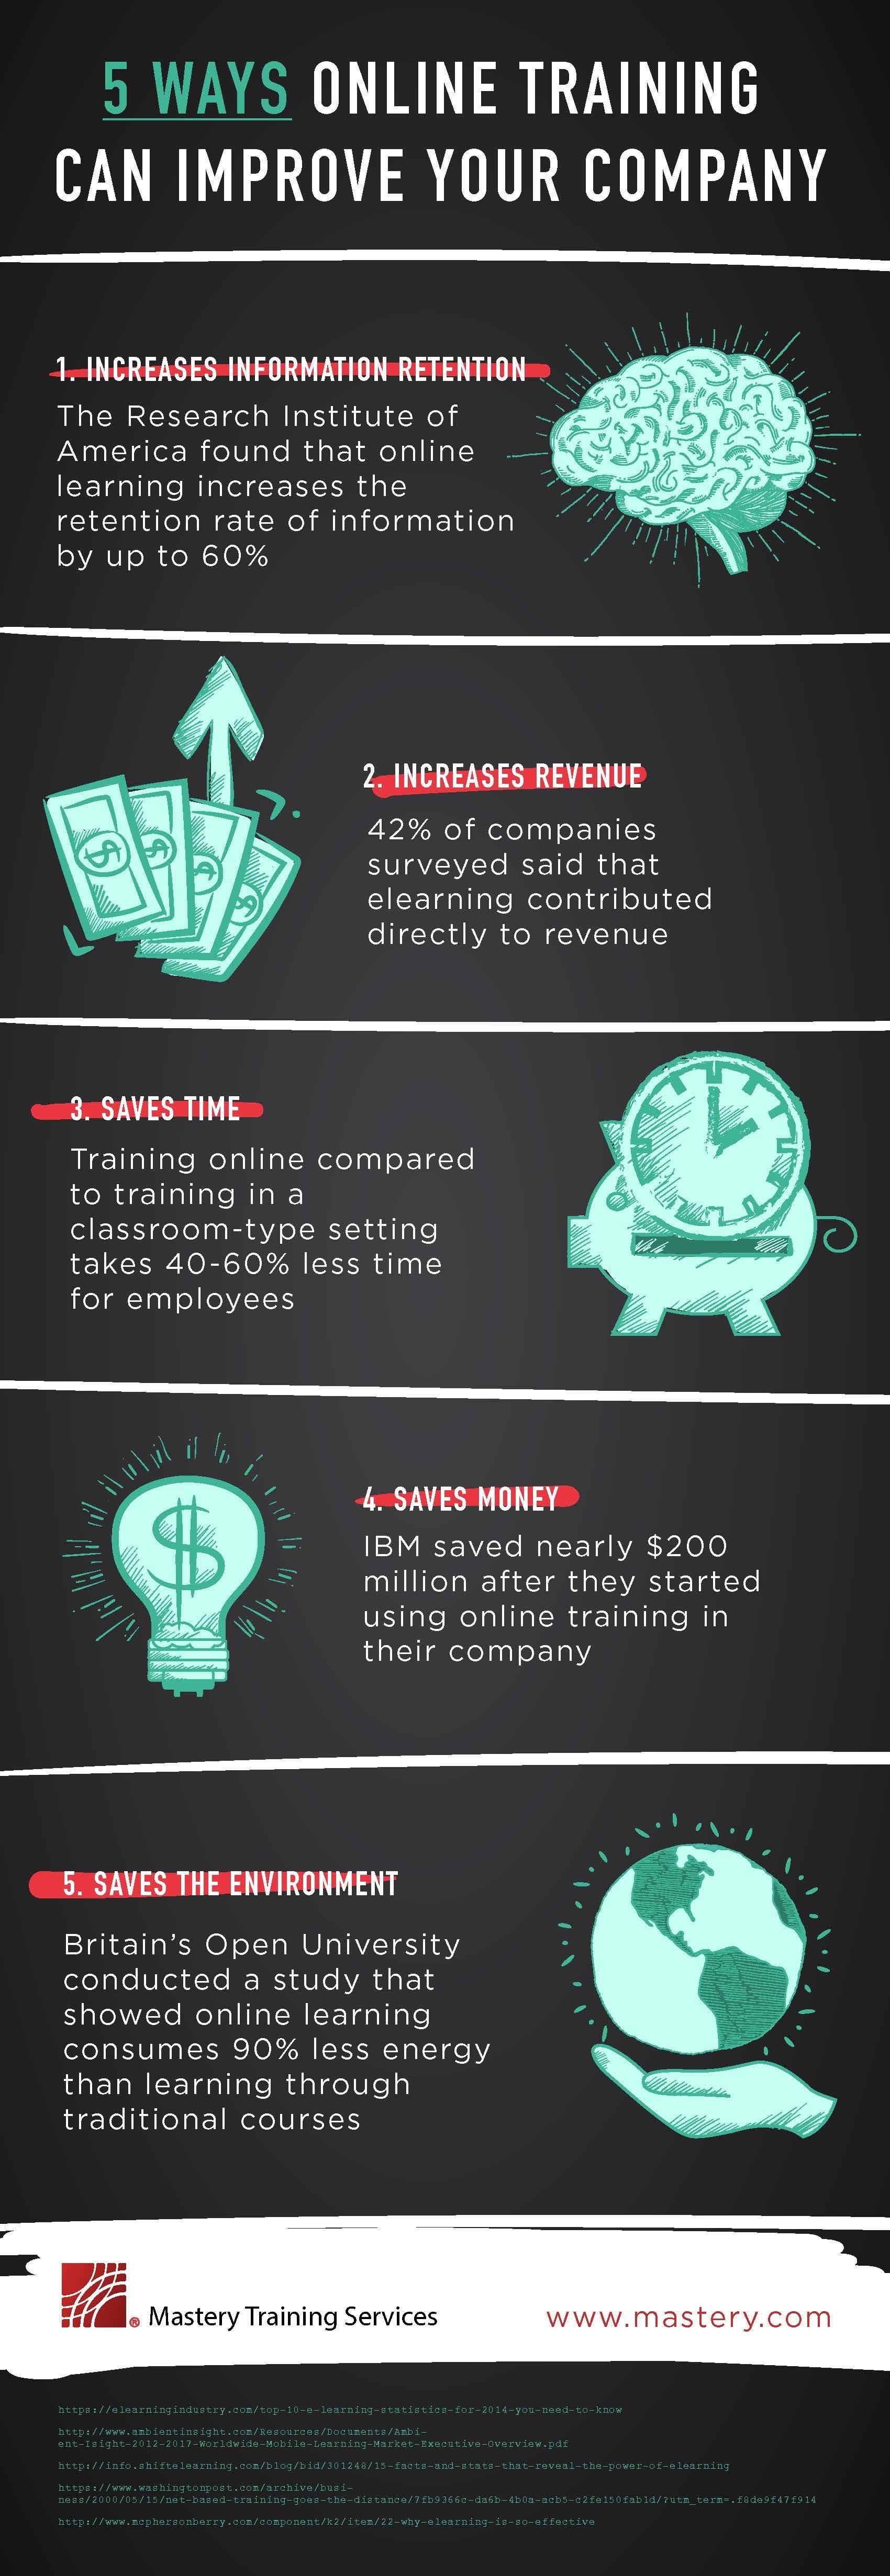 5 Ways Online Training Can Improve Your Company Infographic